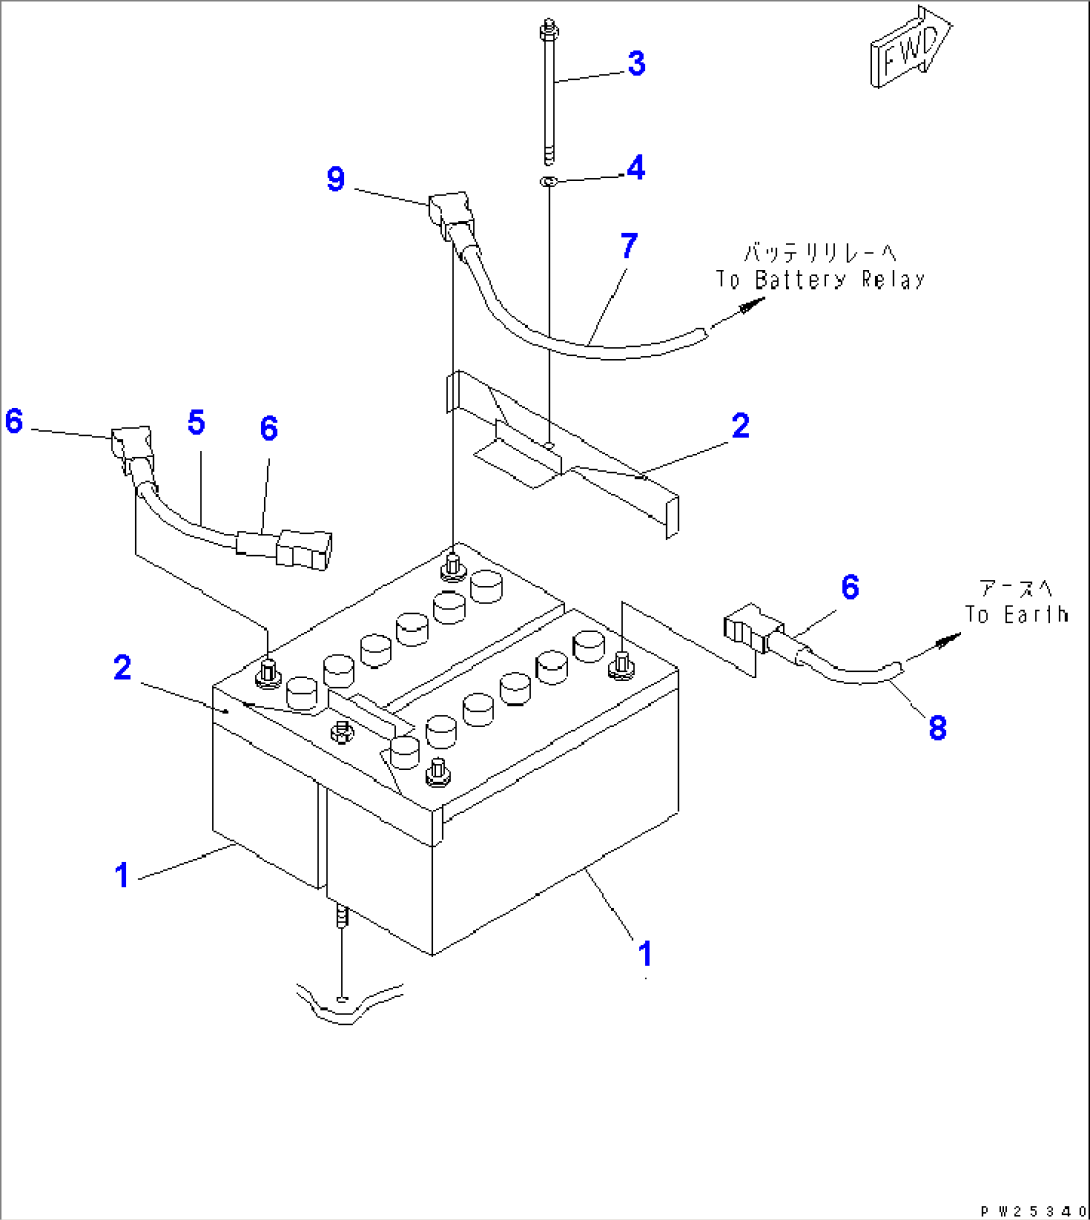 ELECTRICAL SYSTEM (BATTERY)